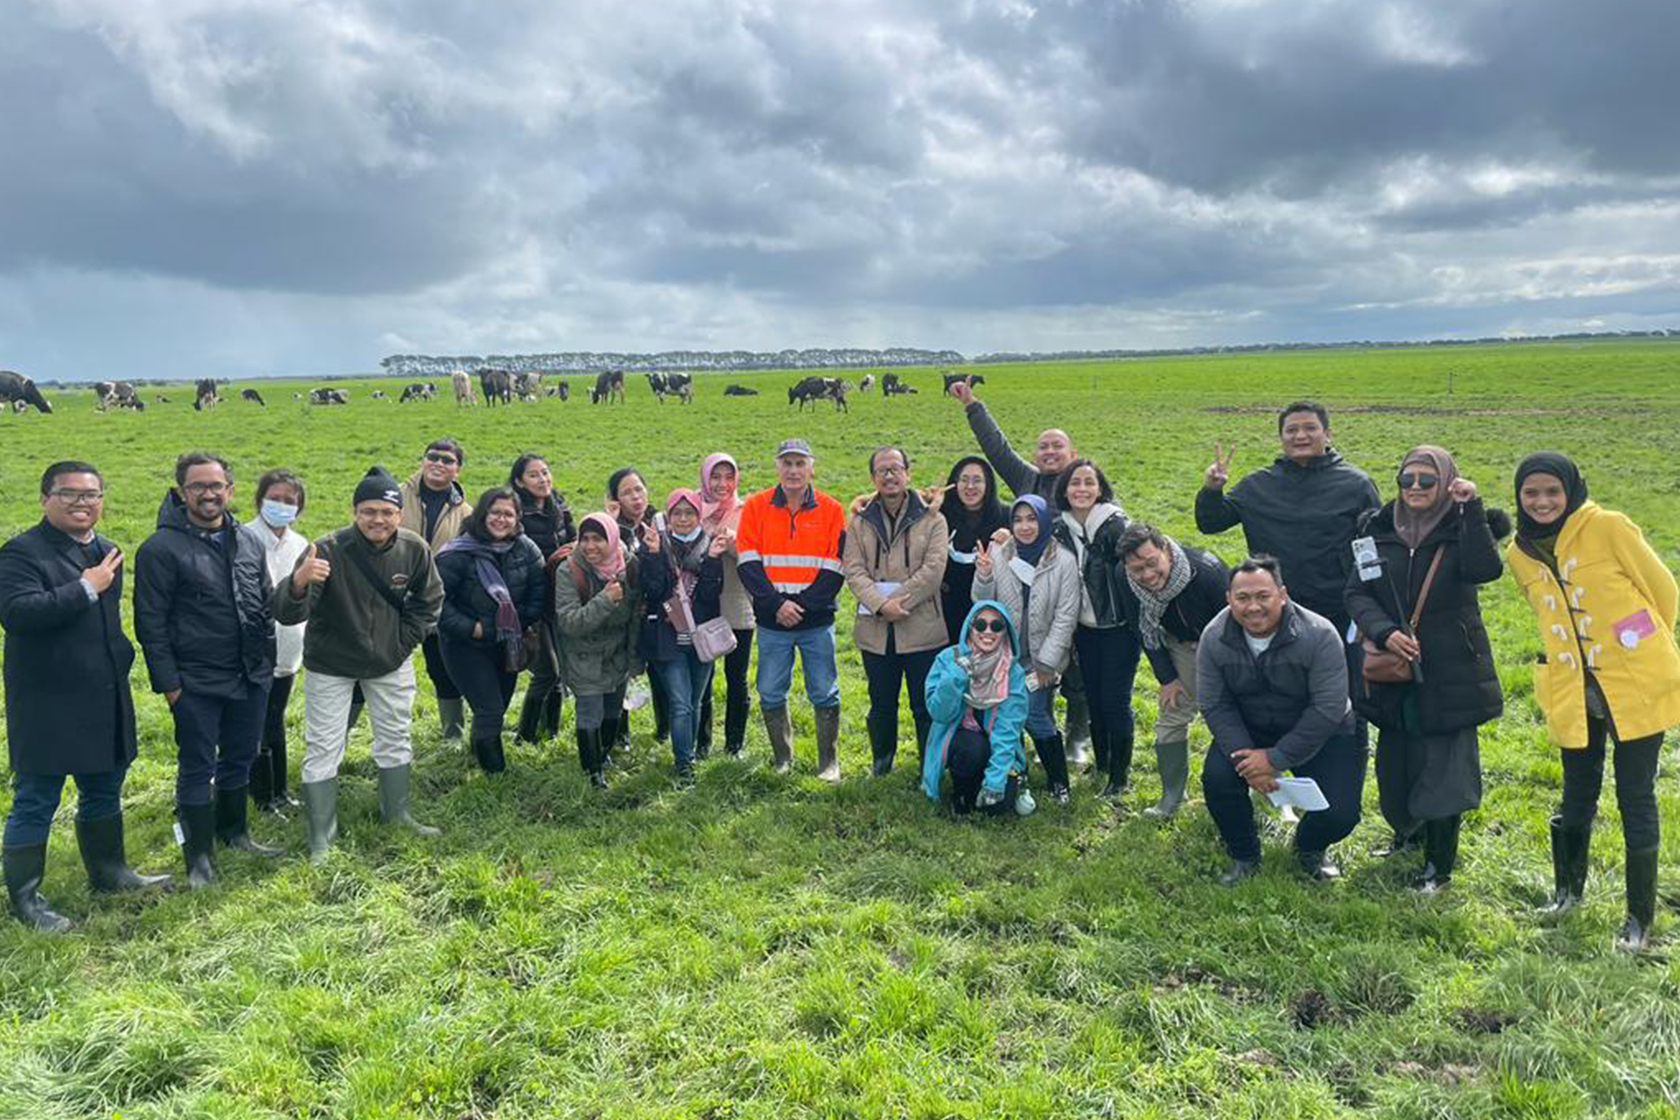 The participants of the Sustainable Agri-Food System took a group photo on a pasture with the cattle in the background.